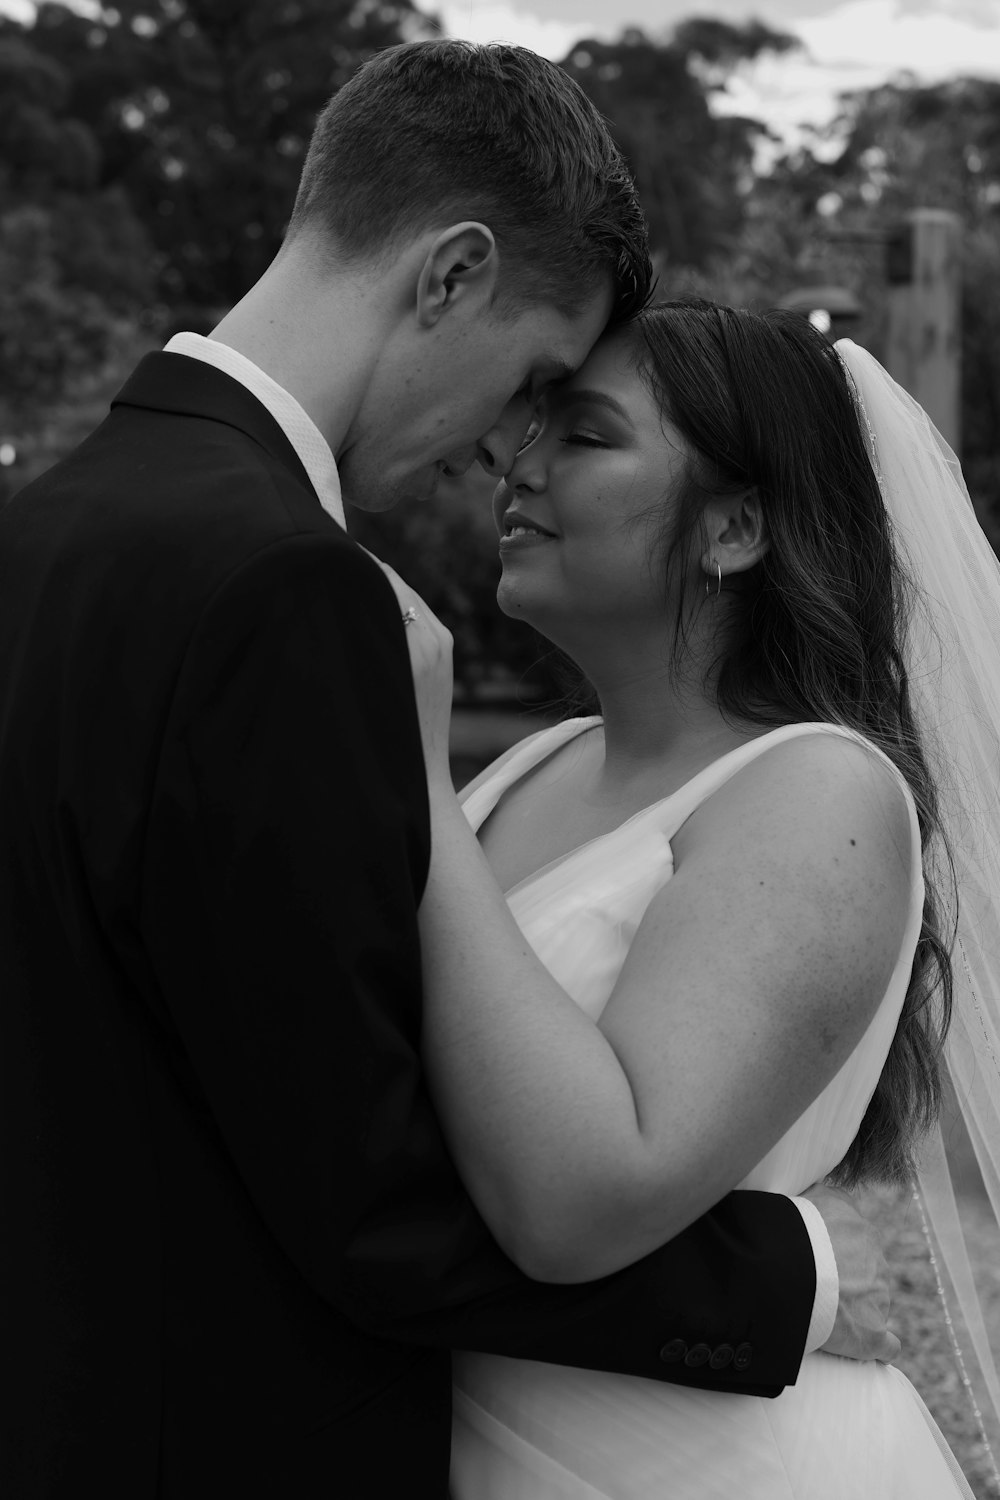 a bride and groom embracing each other in a black and white photo